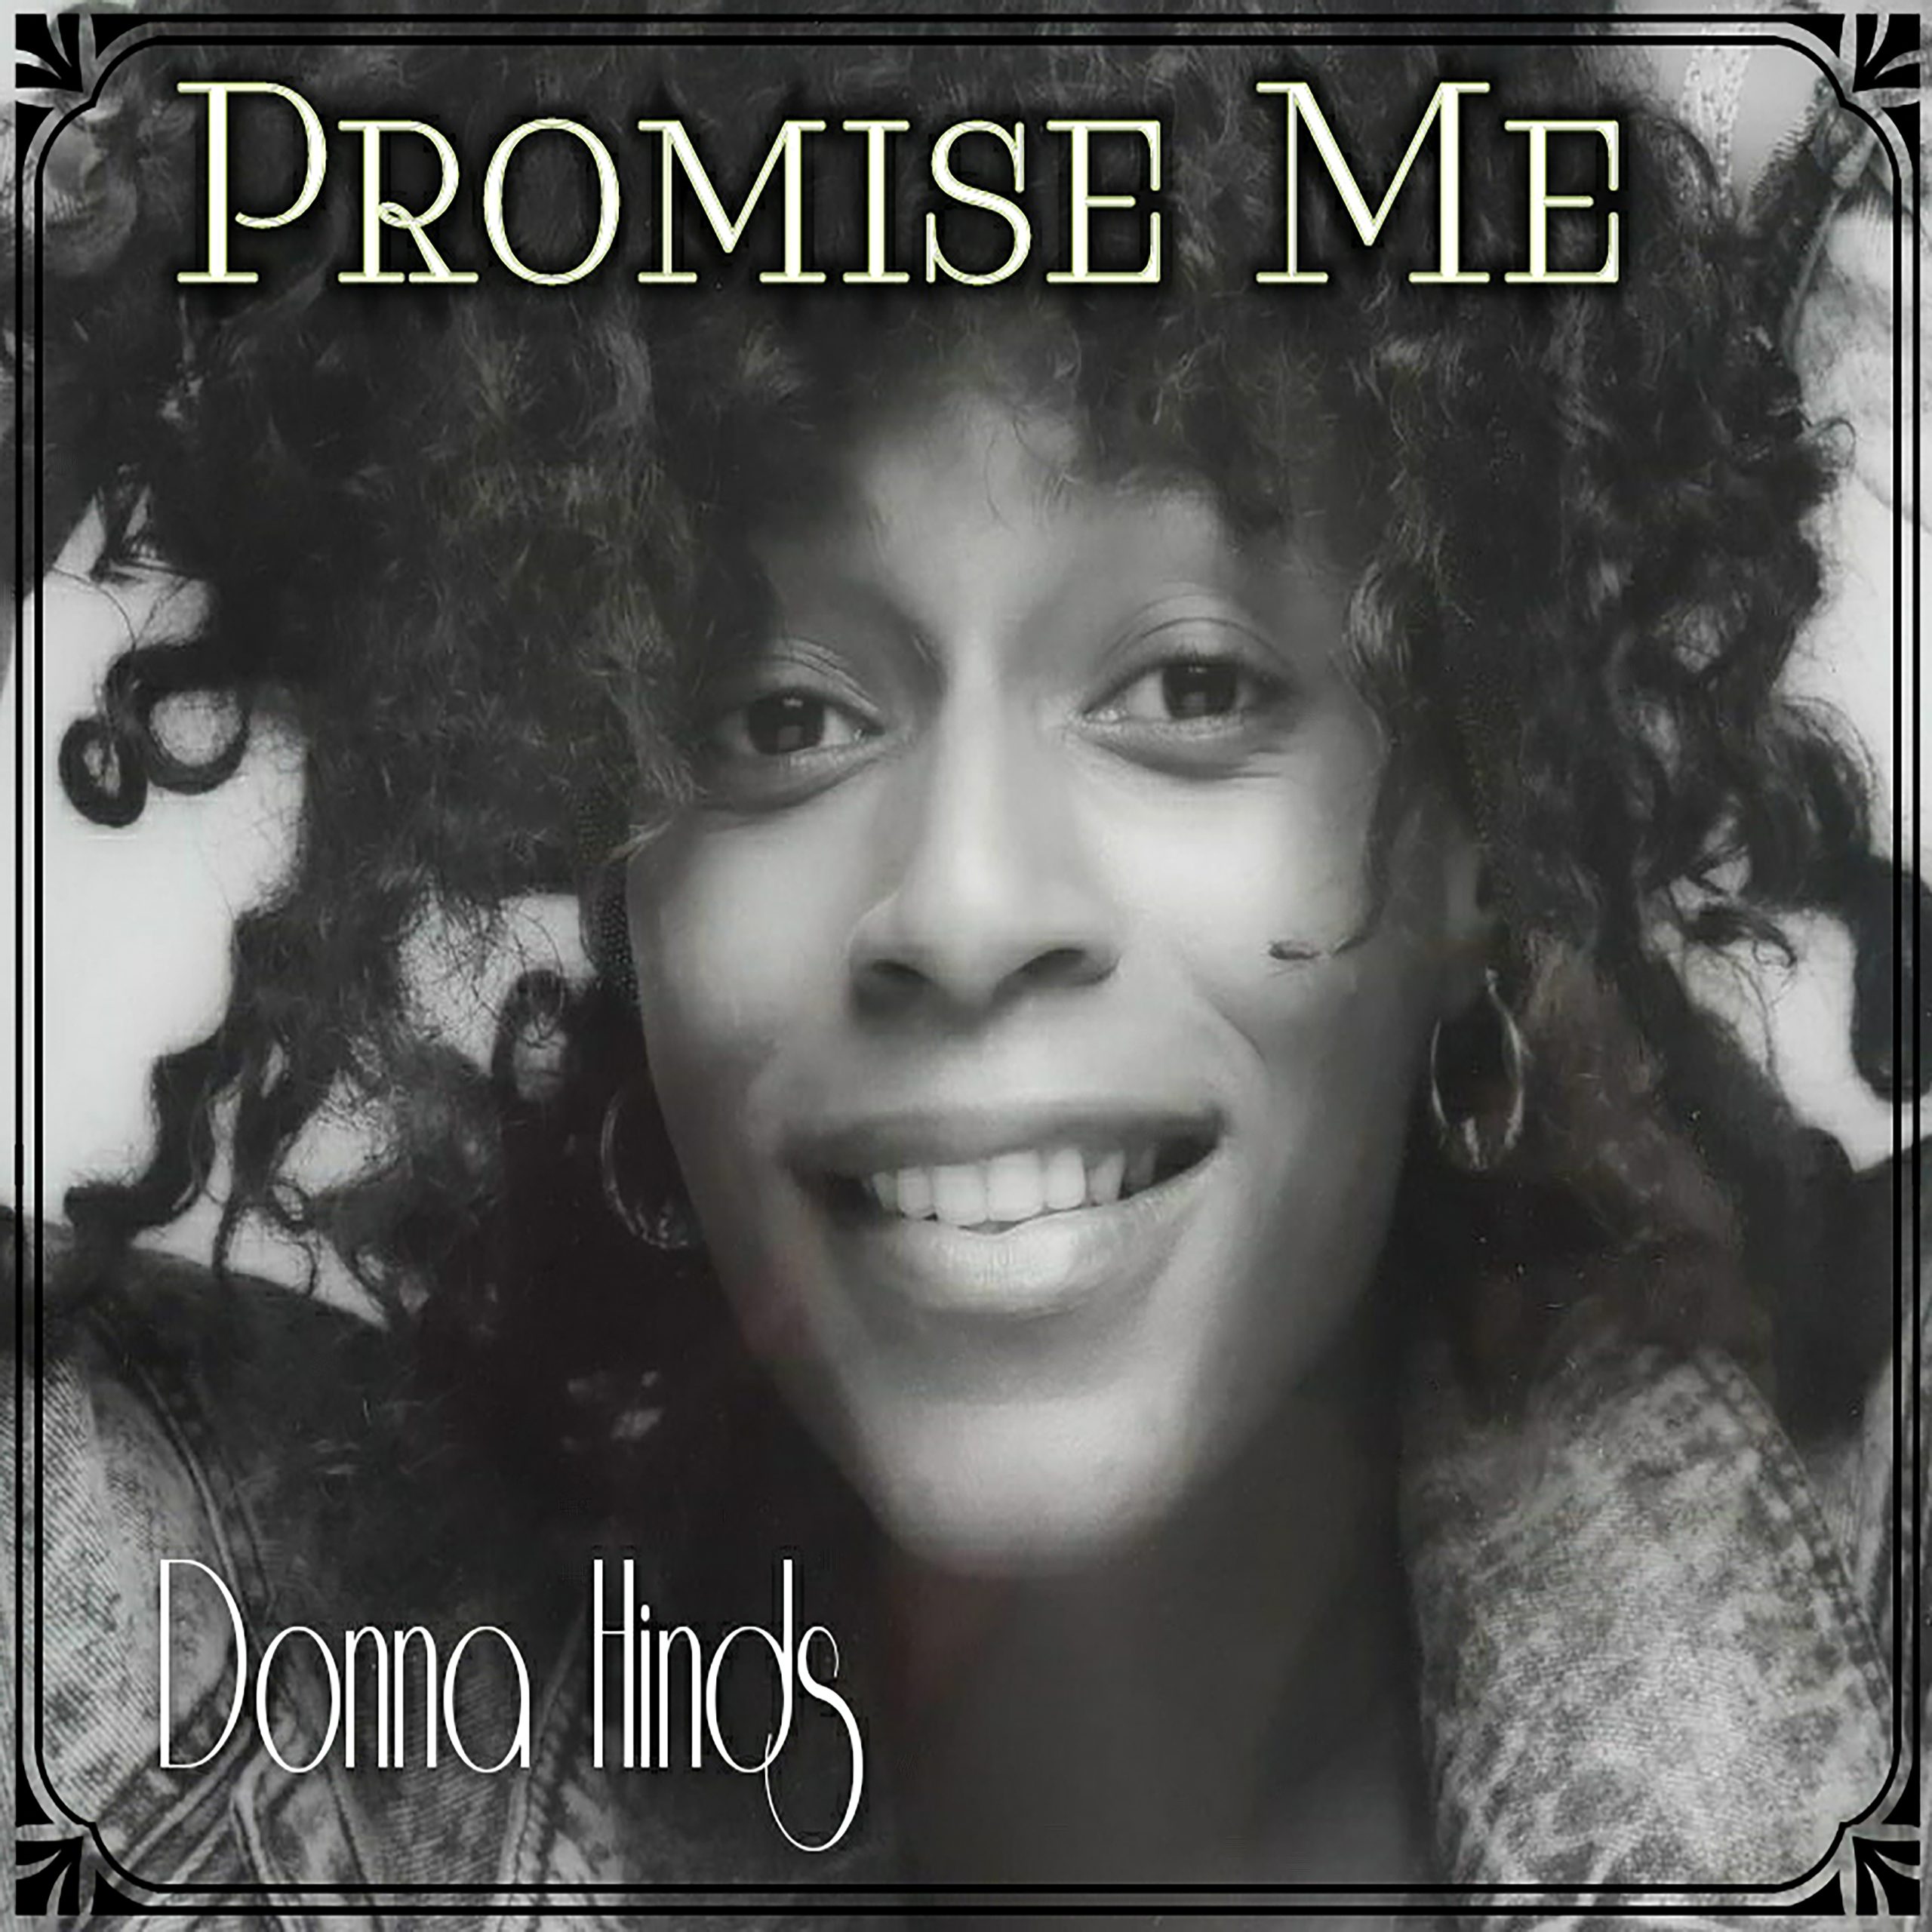 Coming Soon. Promise Me by Donna Hinds